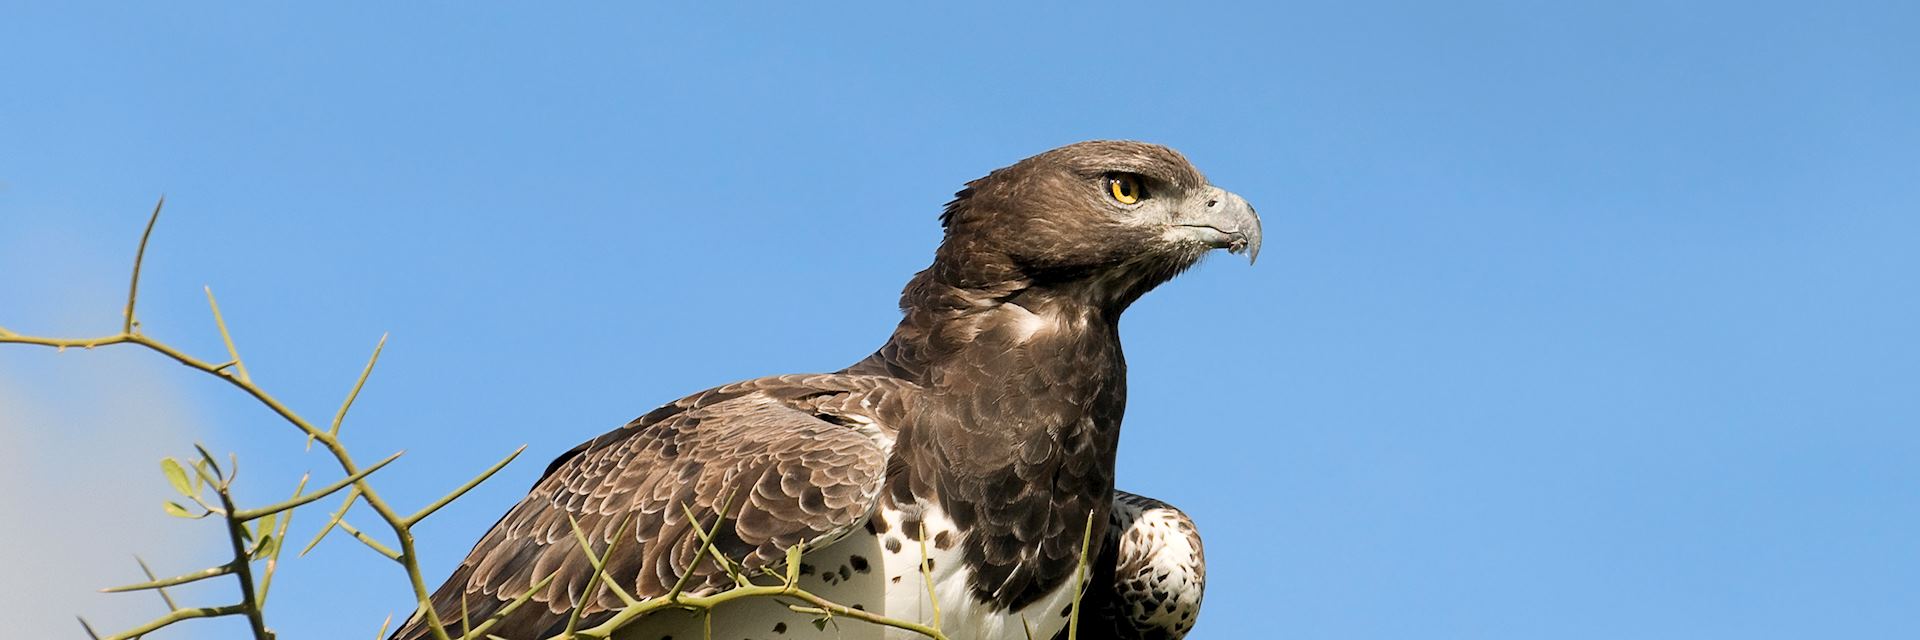 Martial eagle, Viphya Forest Mountains